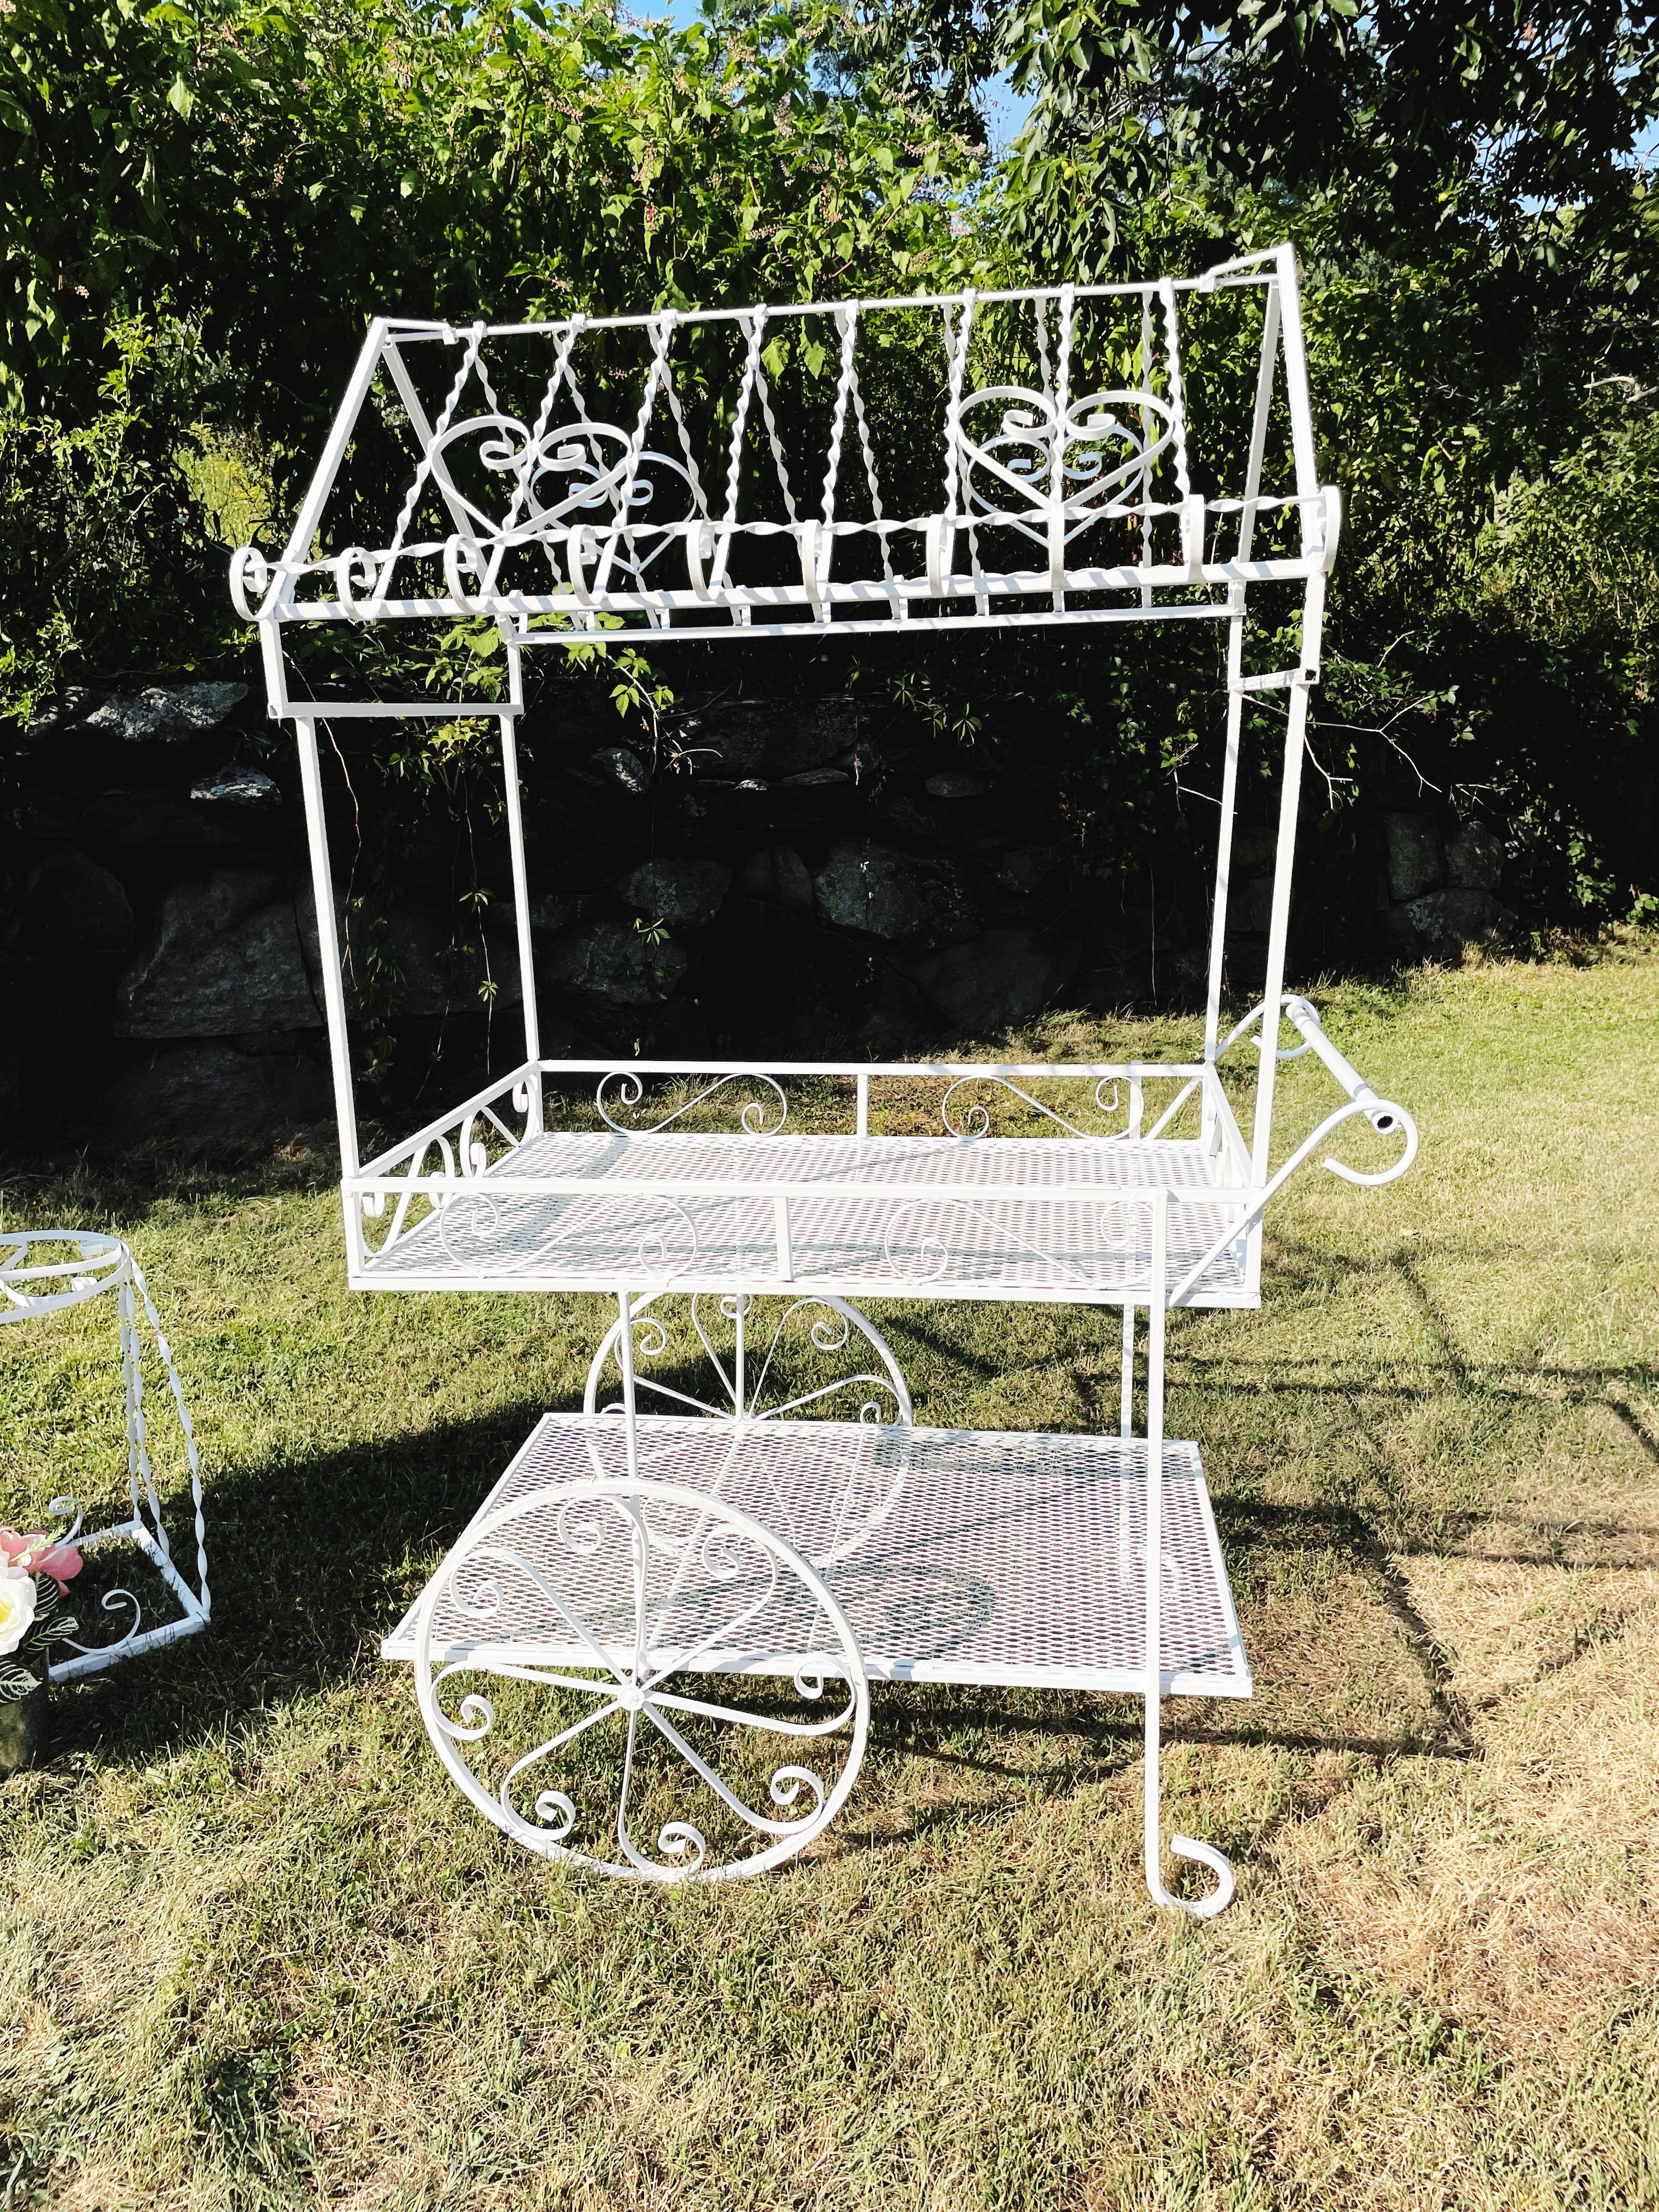 Shop Salterini Garden Furniture and Woodard Garden Furniture listed here or other Vintage Wrought Iron Patio Furniture Pieces online at our 1stDibs Store Front. Our Vintage Wrought Iron Outdoor Furniture Pieces are Available now and Ready to Ship